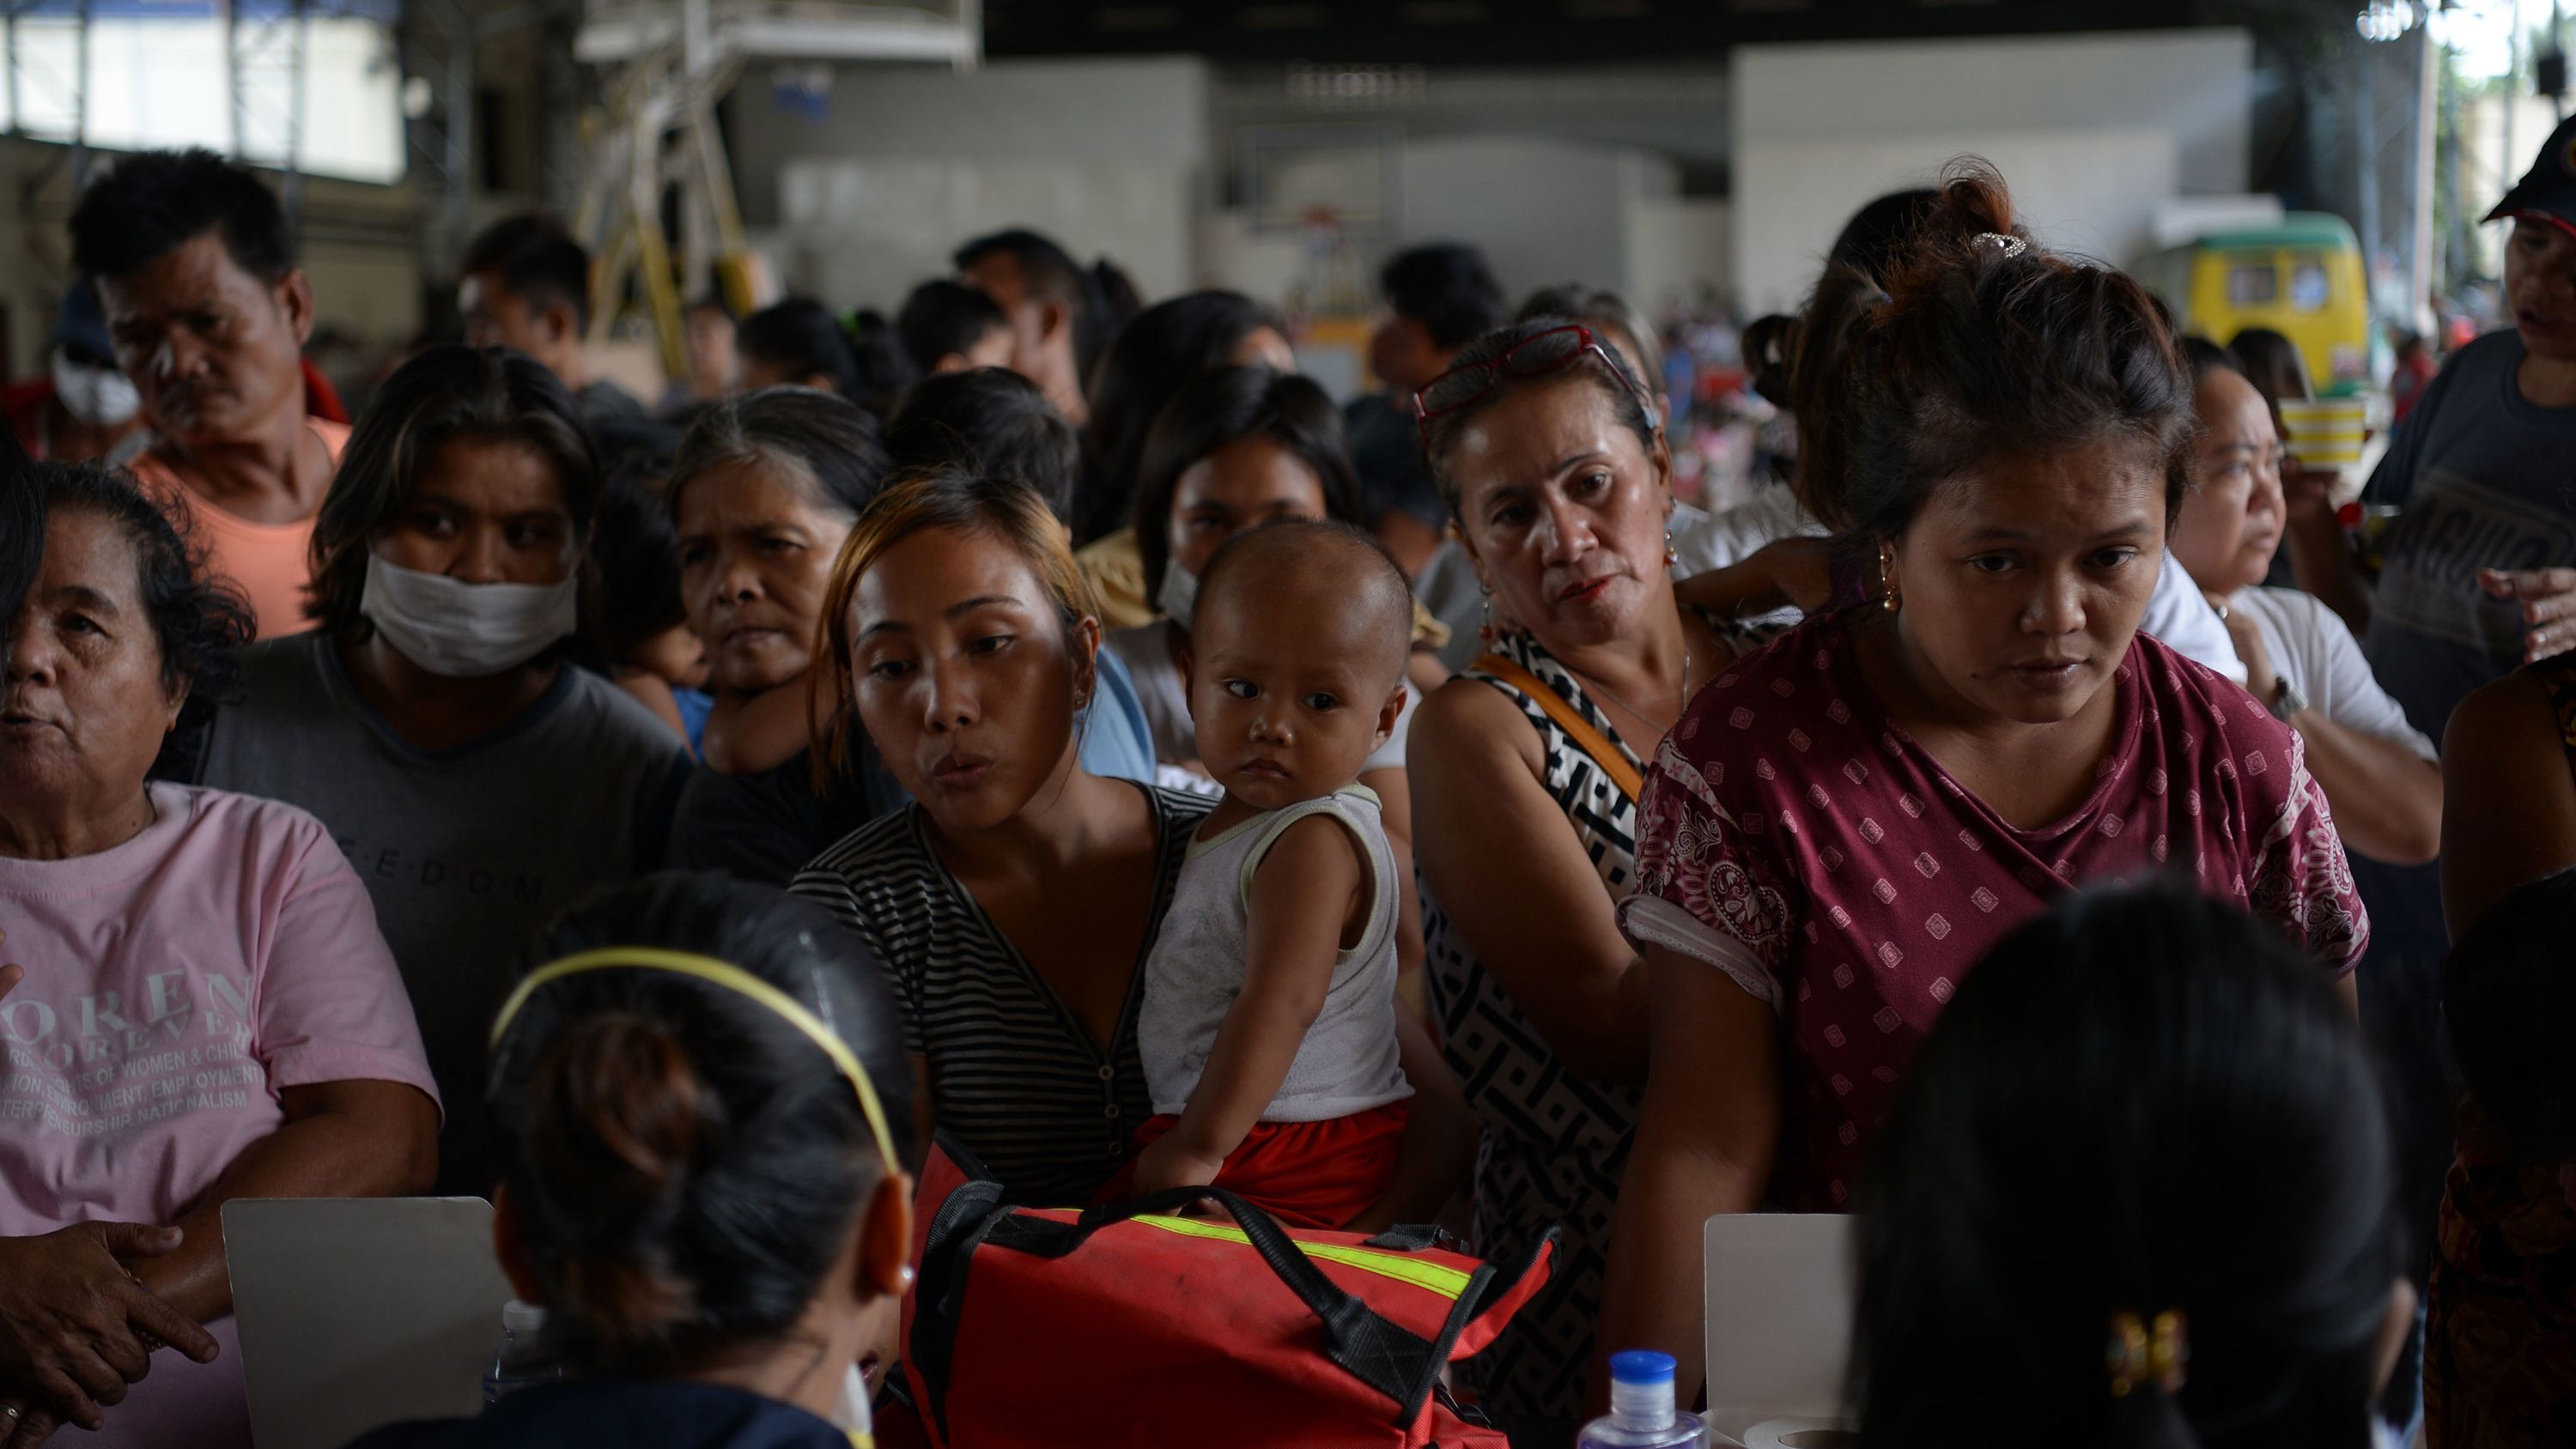 Evacuees line up to have their children checked by medical personnel at an evacuation center in Tanauan.